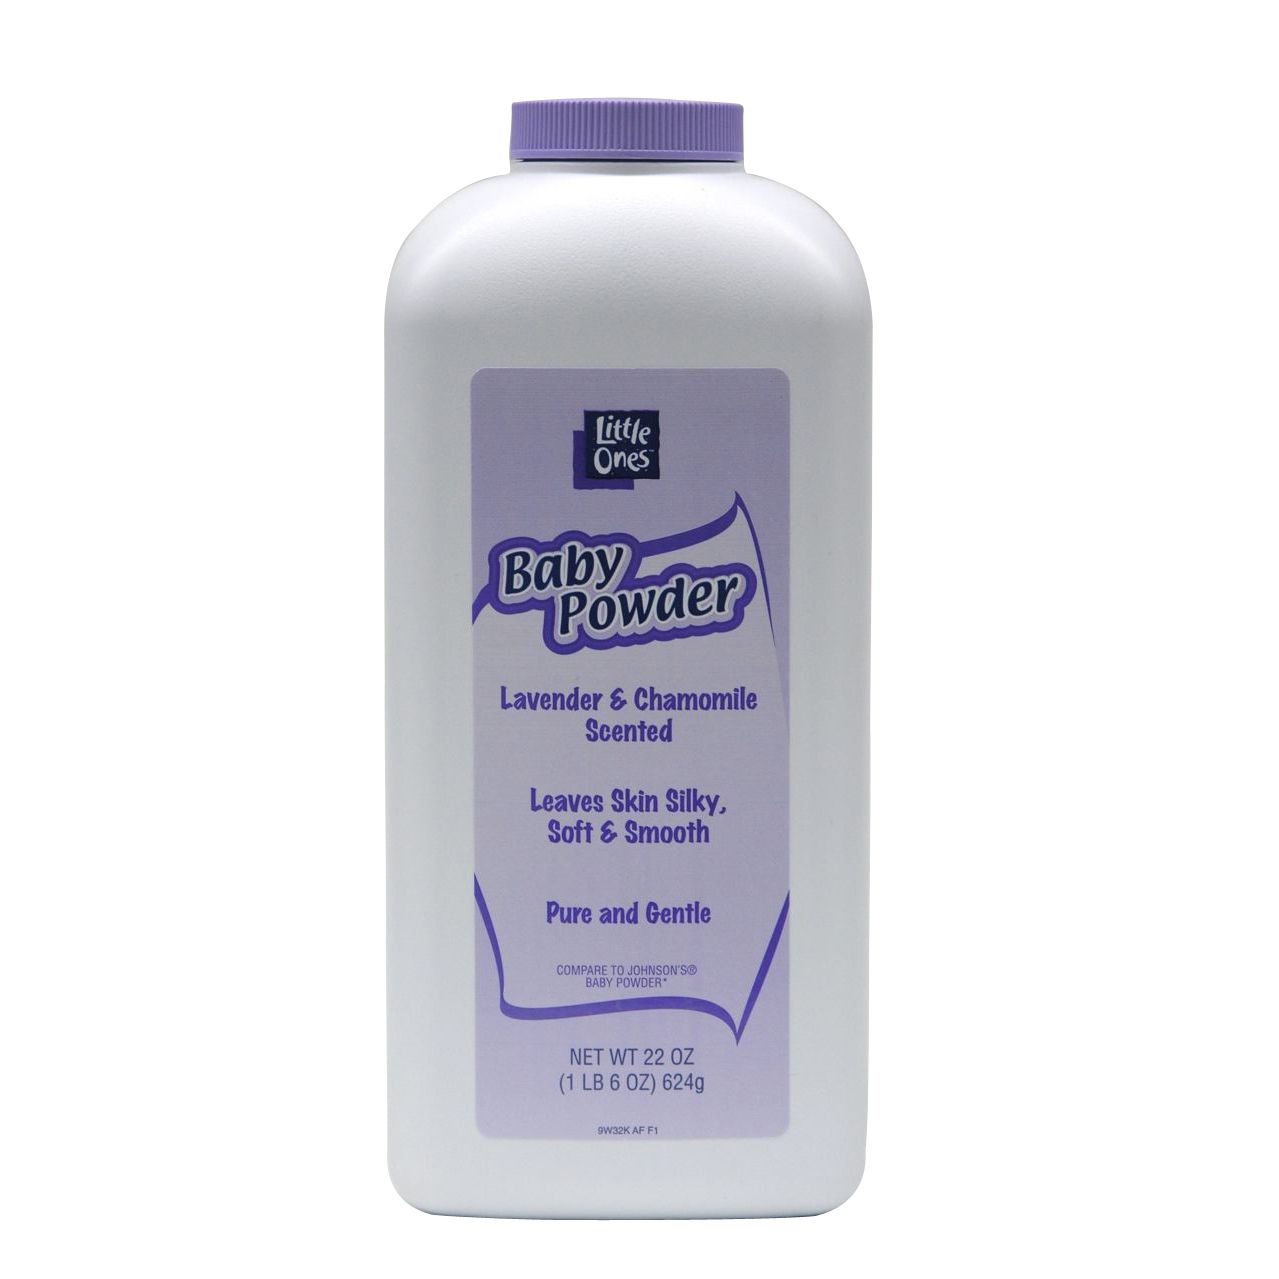 Little Ones Baby Powder Lavender & Chamomile Scented 22 Ounce Plastic Bottle